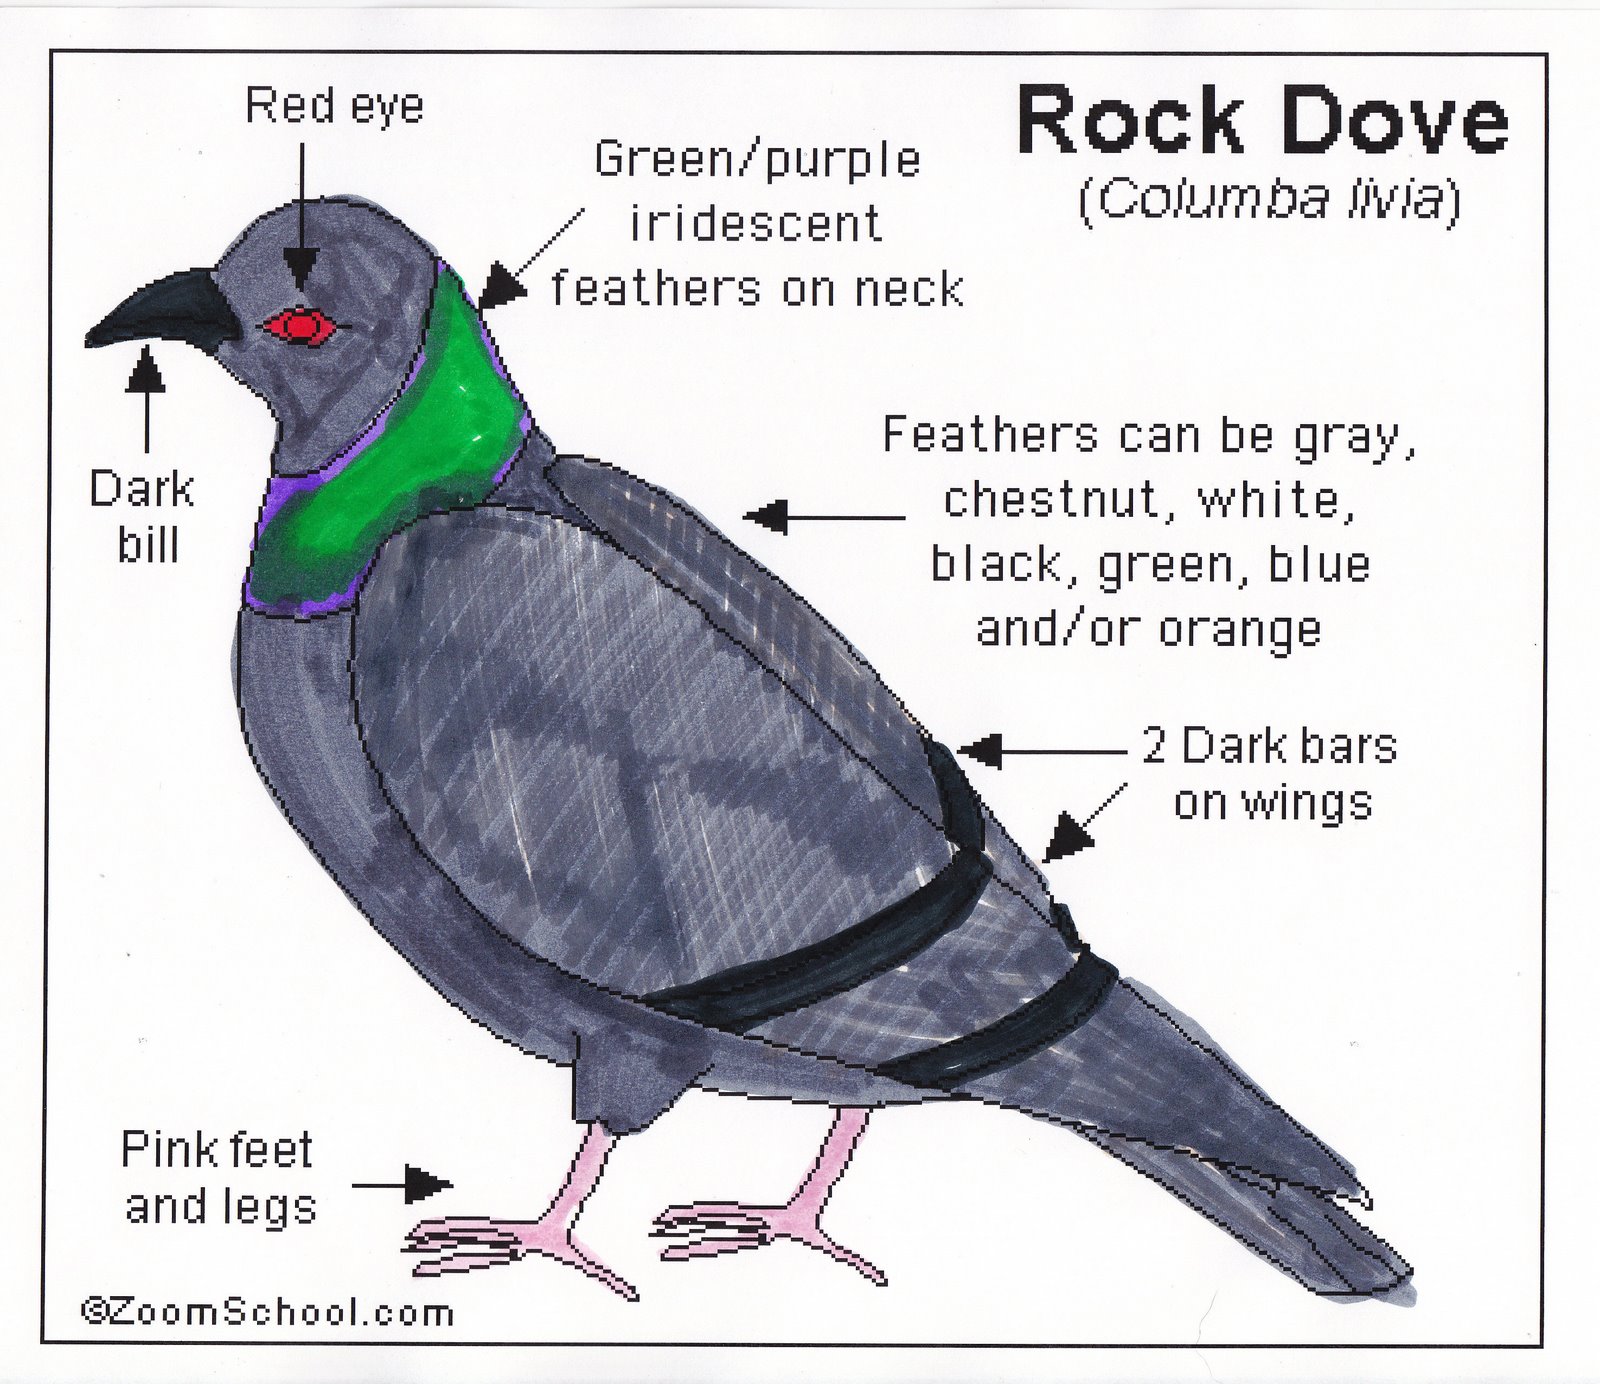 [Pigeon++or+Rock+Dove+A.jpg]